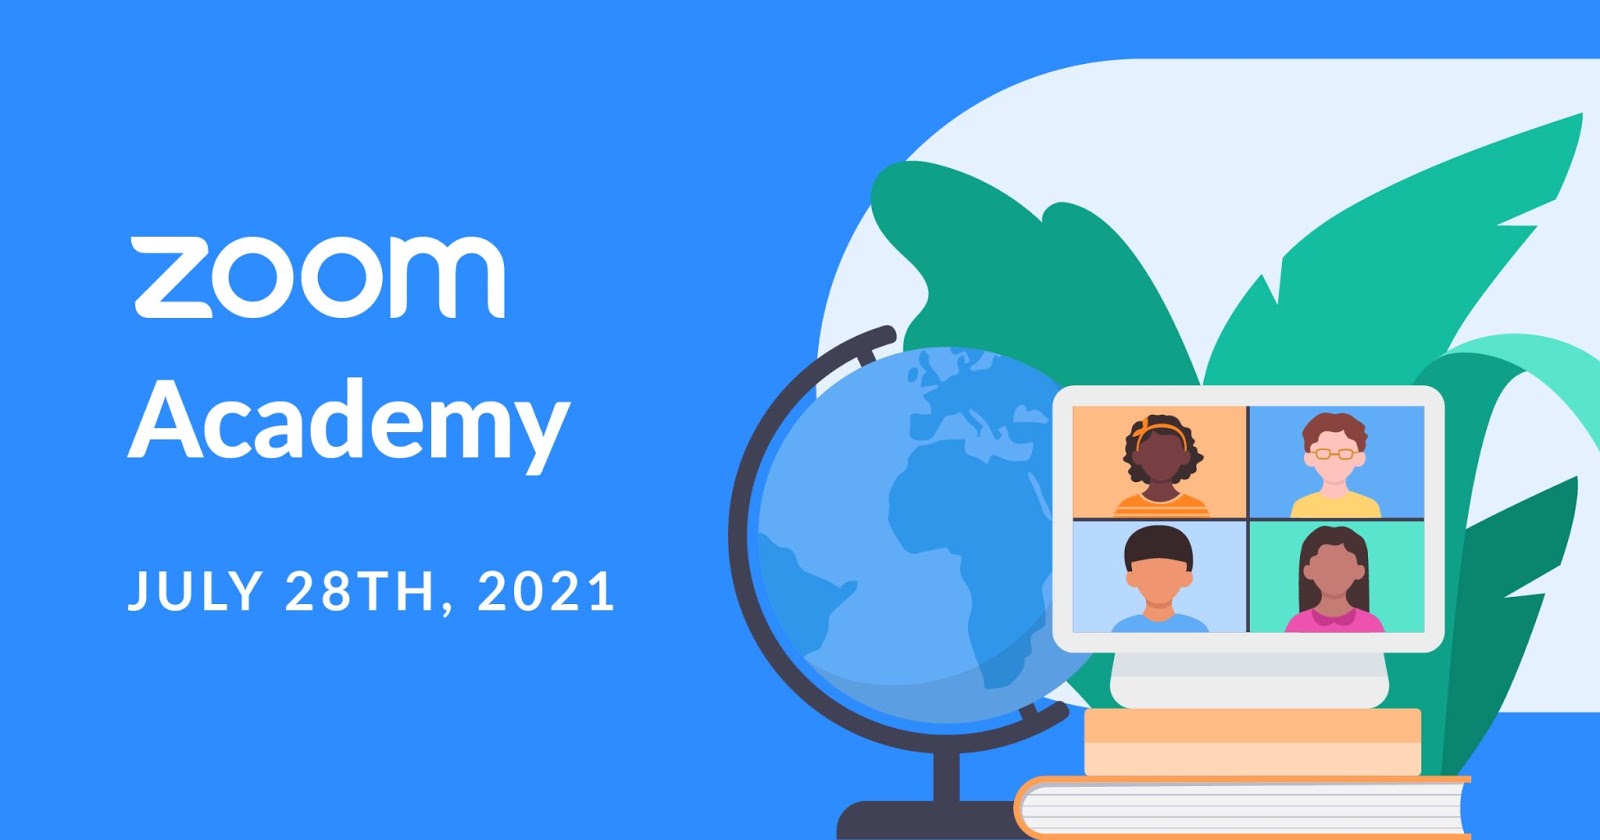 Let The Learning Continue! Mark Your Calendars For Zoom Academy 2021